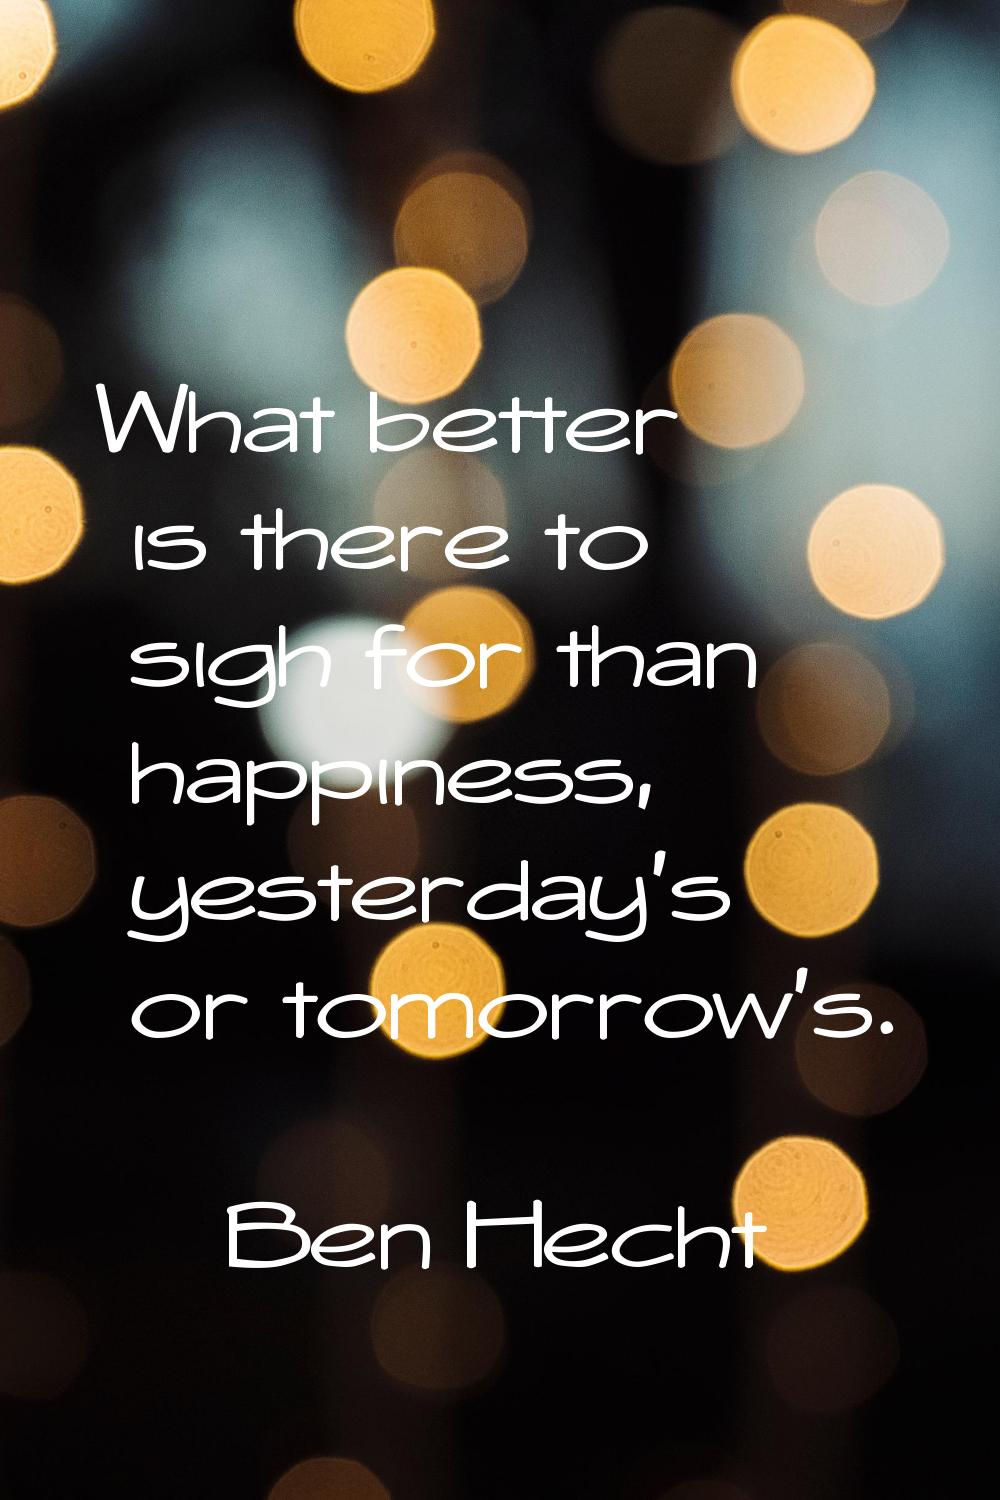 What better is there to sigh for than happiness, yesterday's or tomorrow's.